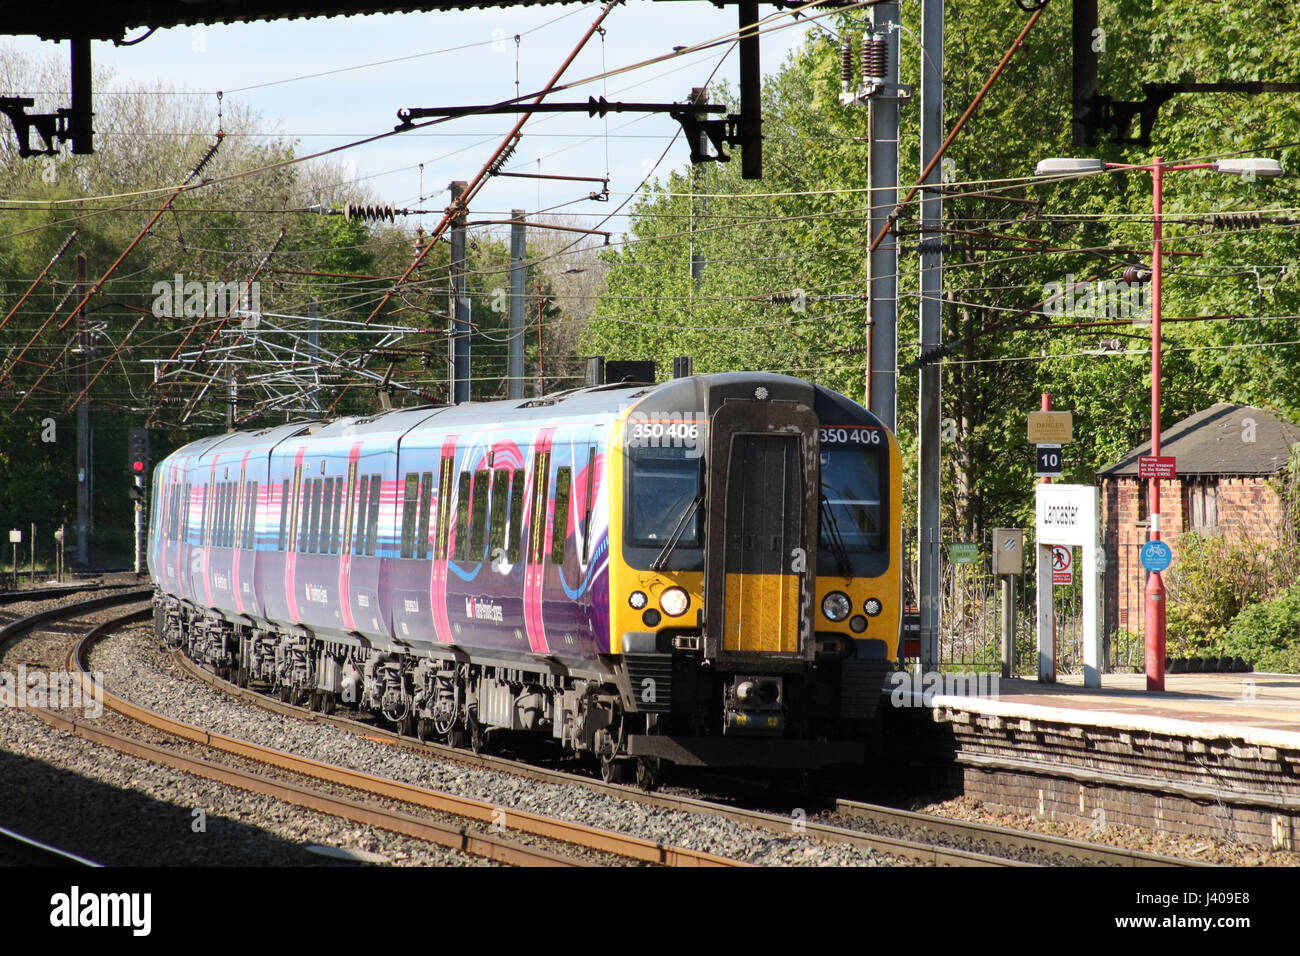 Class 350 electric multiple unit train, First Transpennine Express livery, arriving at platform 4 at Lancaster railway station on West Coast Main Line Stock Photo